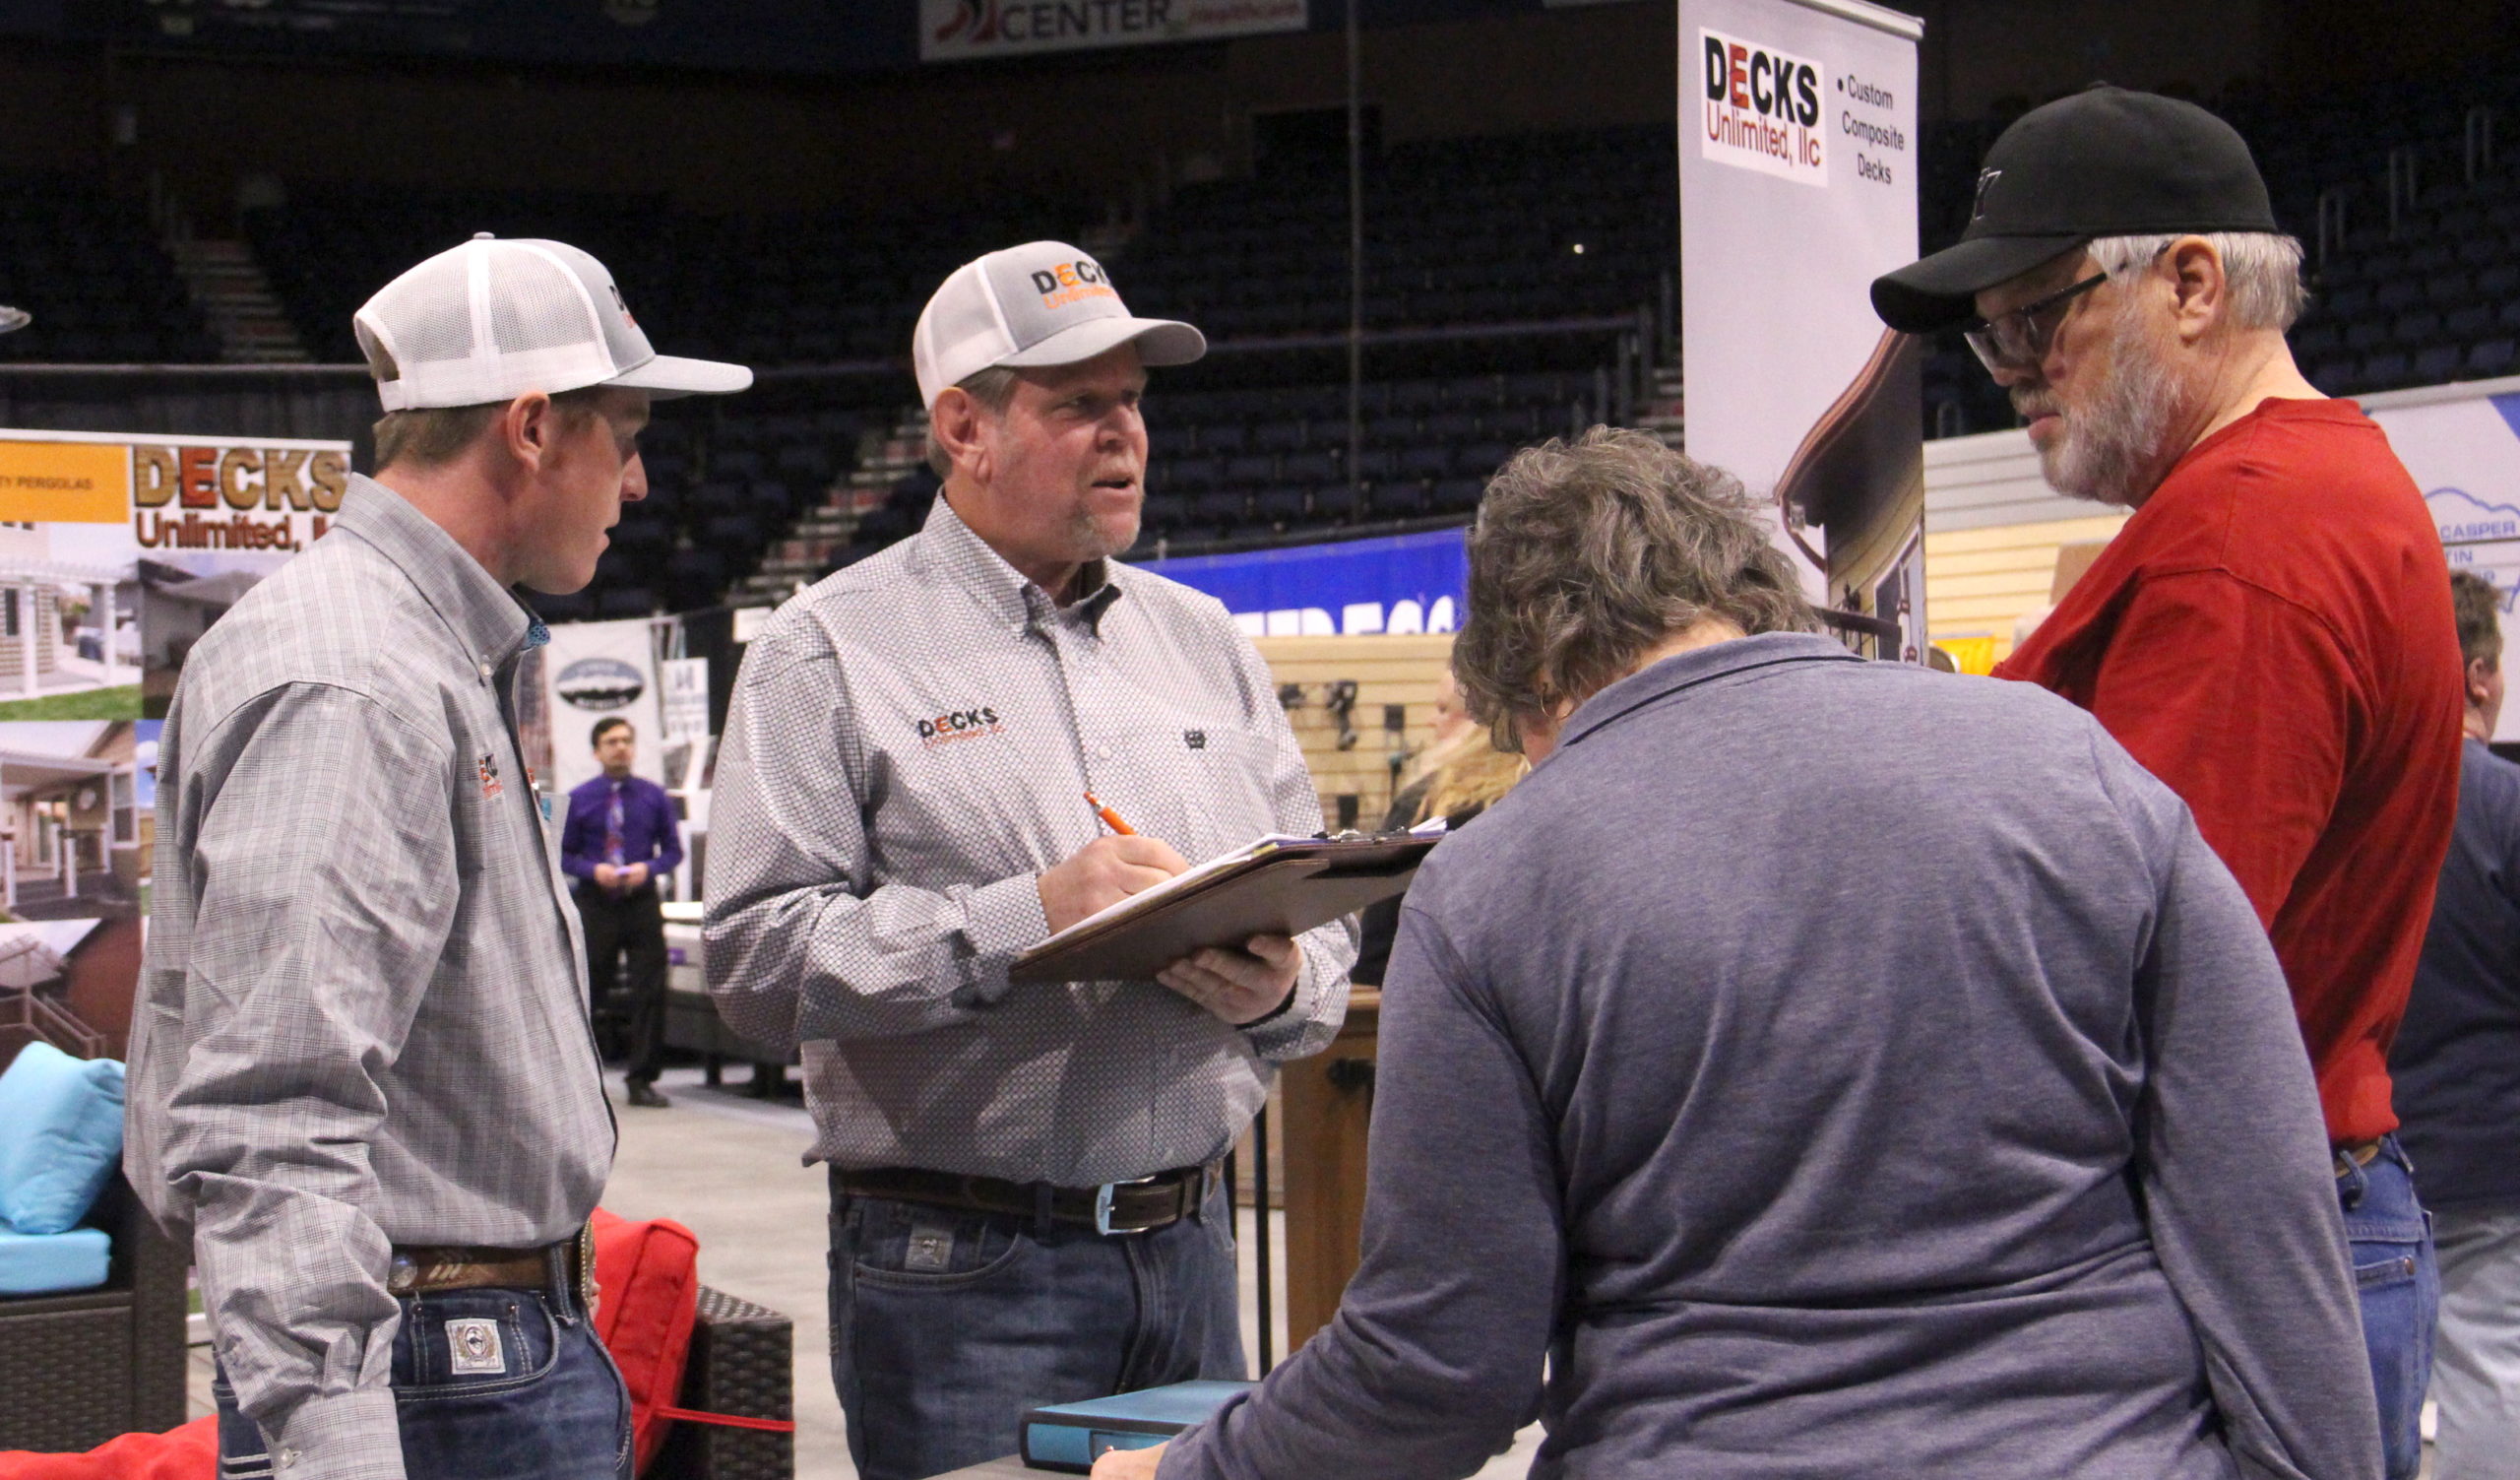 Contractors at Home and Garden show prep for busy construction season amid rising cost of fuels and materials